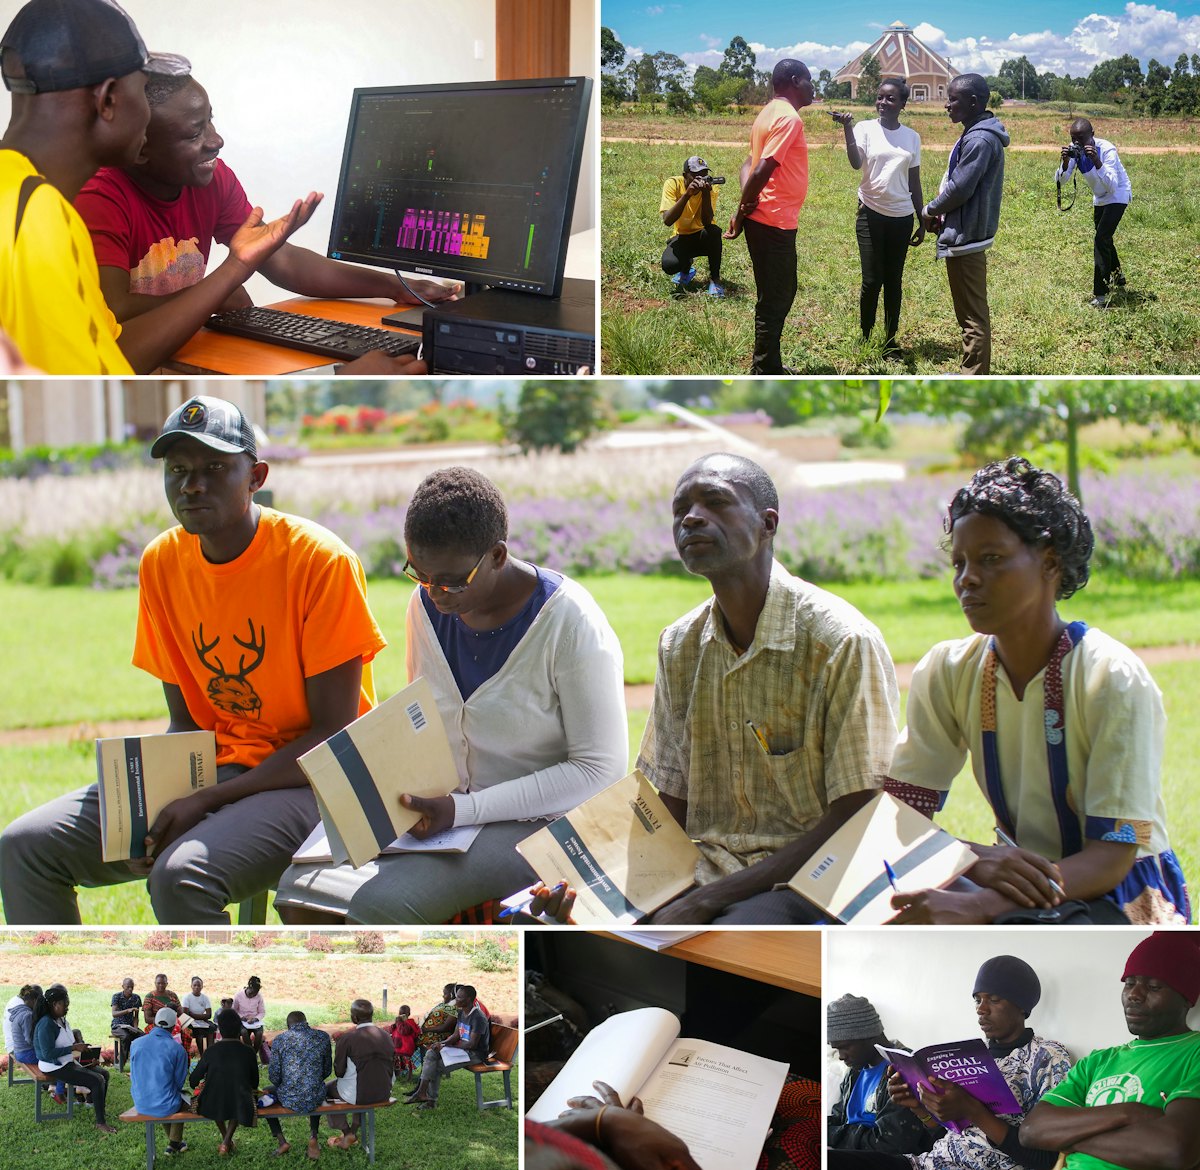 In Kenya, a group of youth recorded and distributed programs through messaging platforms that weave together insights and perspectives of people from diverse backgrounds, enriching conversations on themes of social progress.